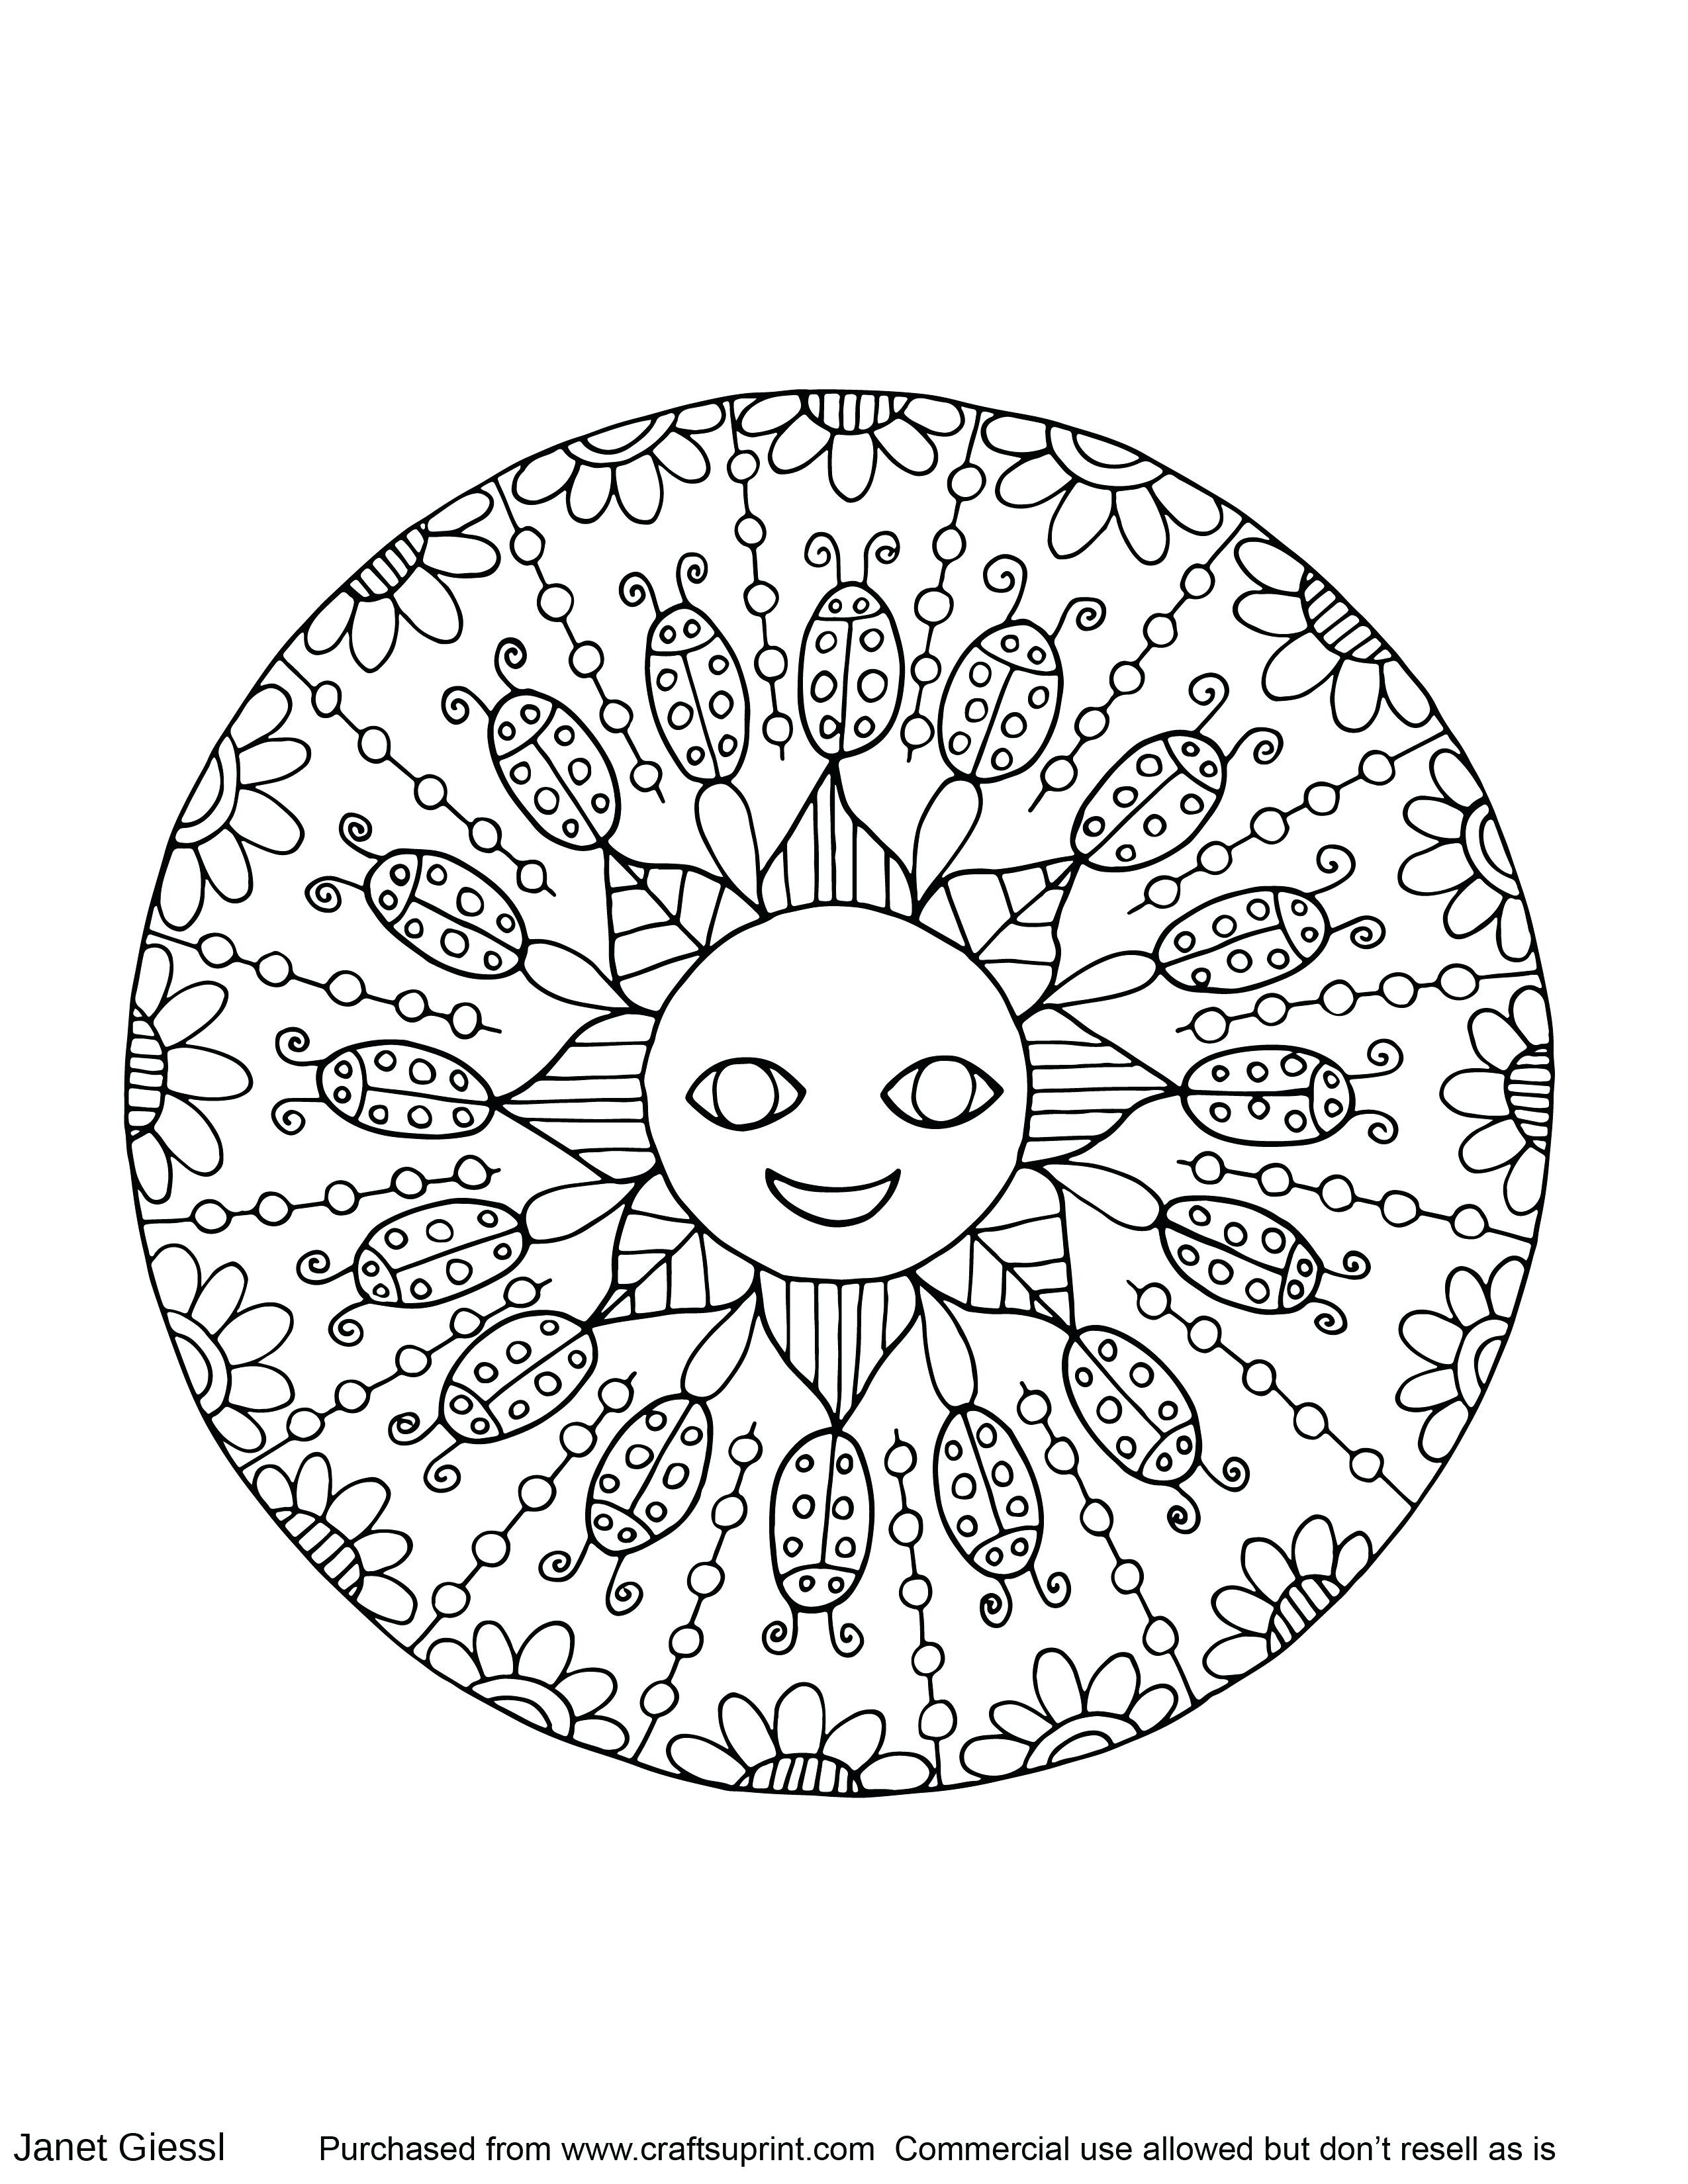 Mandala Coloring Pages Free Online Coloring Pages Mandalaoloring For Kids Free Printable Money